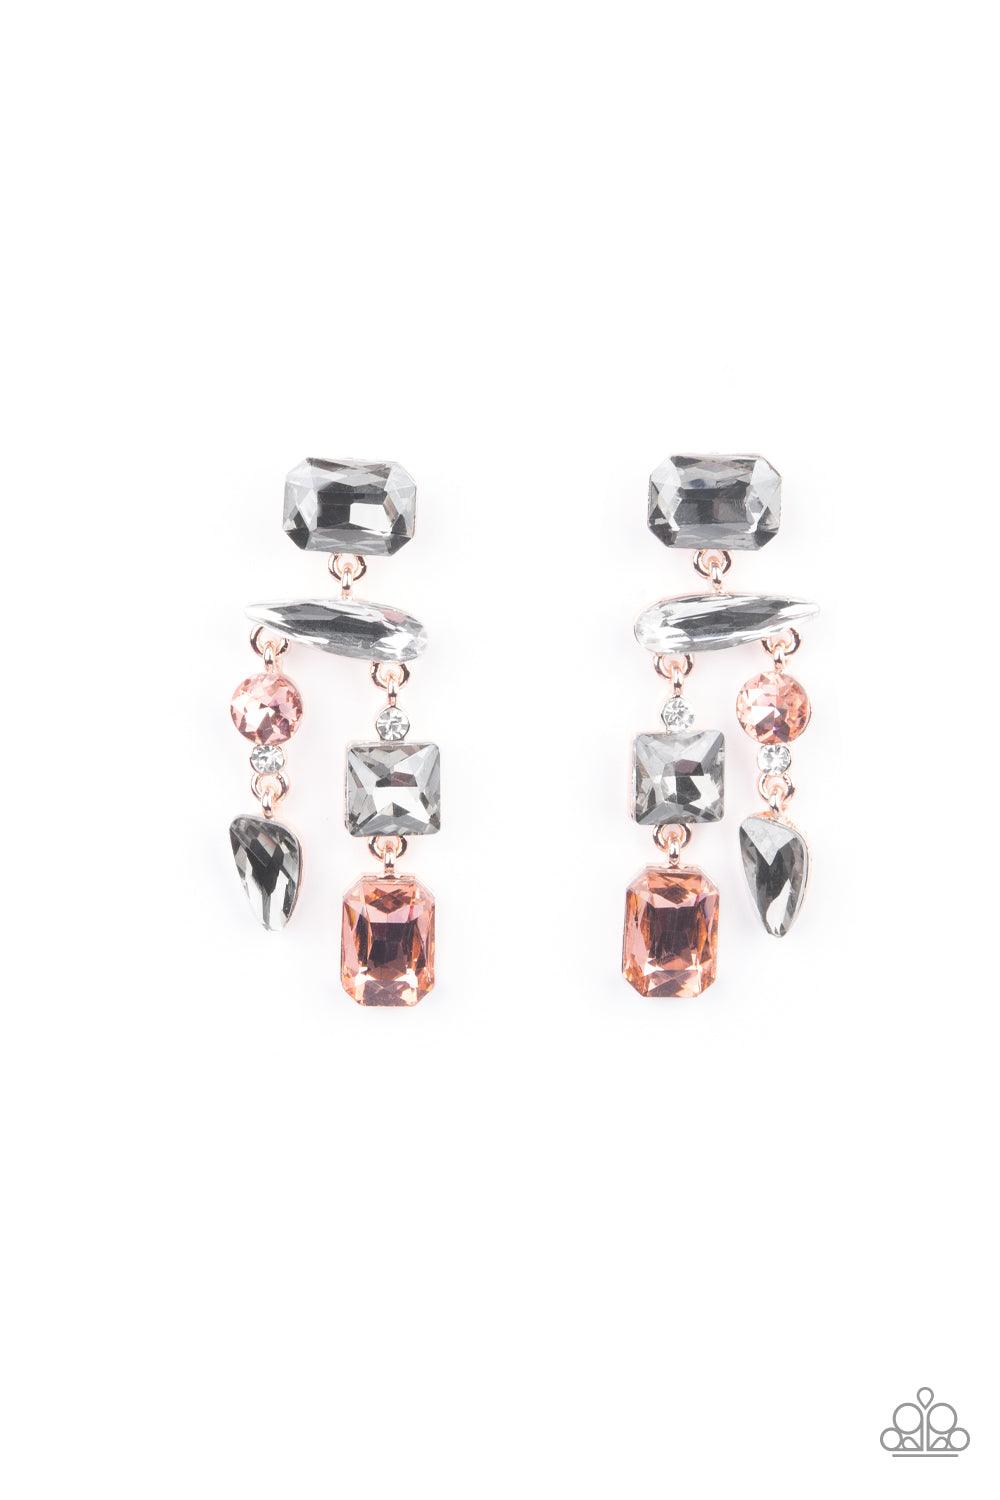 Paparazzi Accessories Hazard Pay - Multi Varying in shape, a smoldering collection of white, smoky, and topaz gems haphazardly link into an edgy chandelier of rose gold frames. Earring attaches to a standard post fitting. Sold as one pair of post earrings